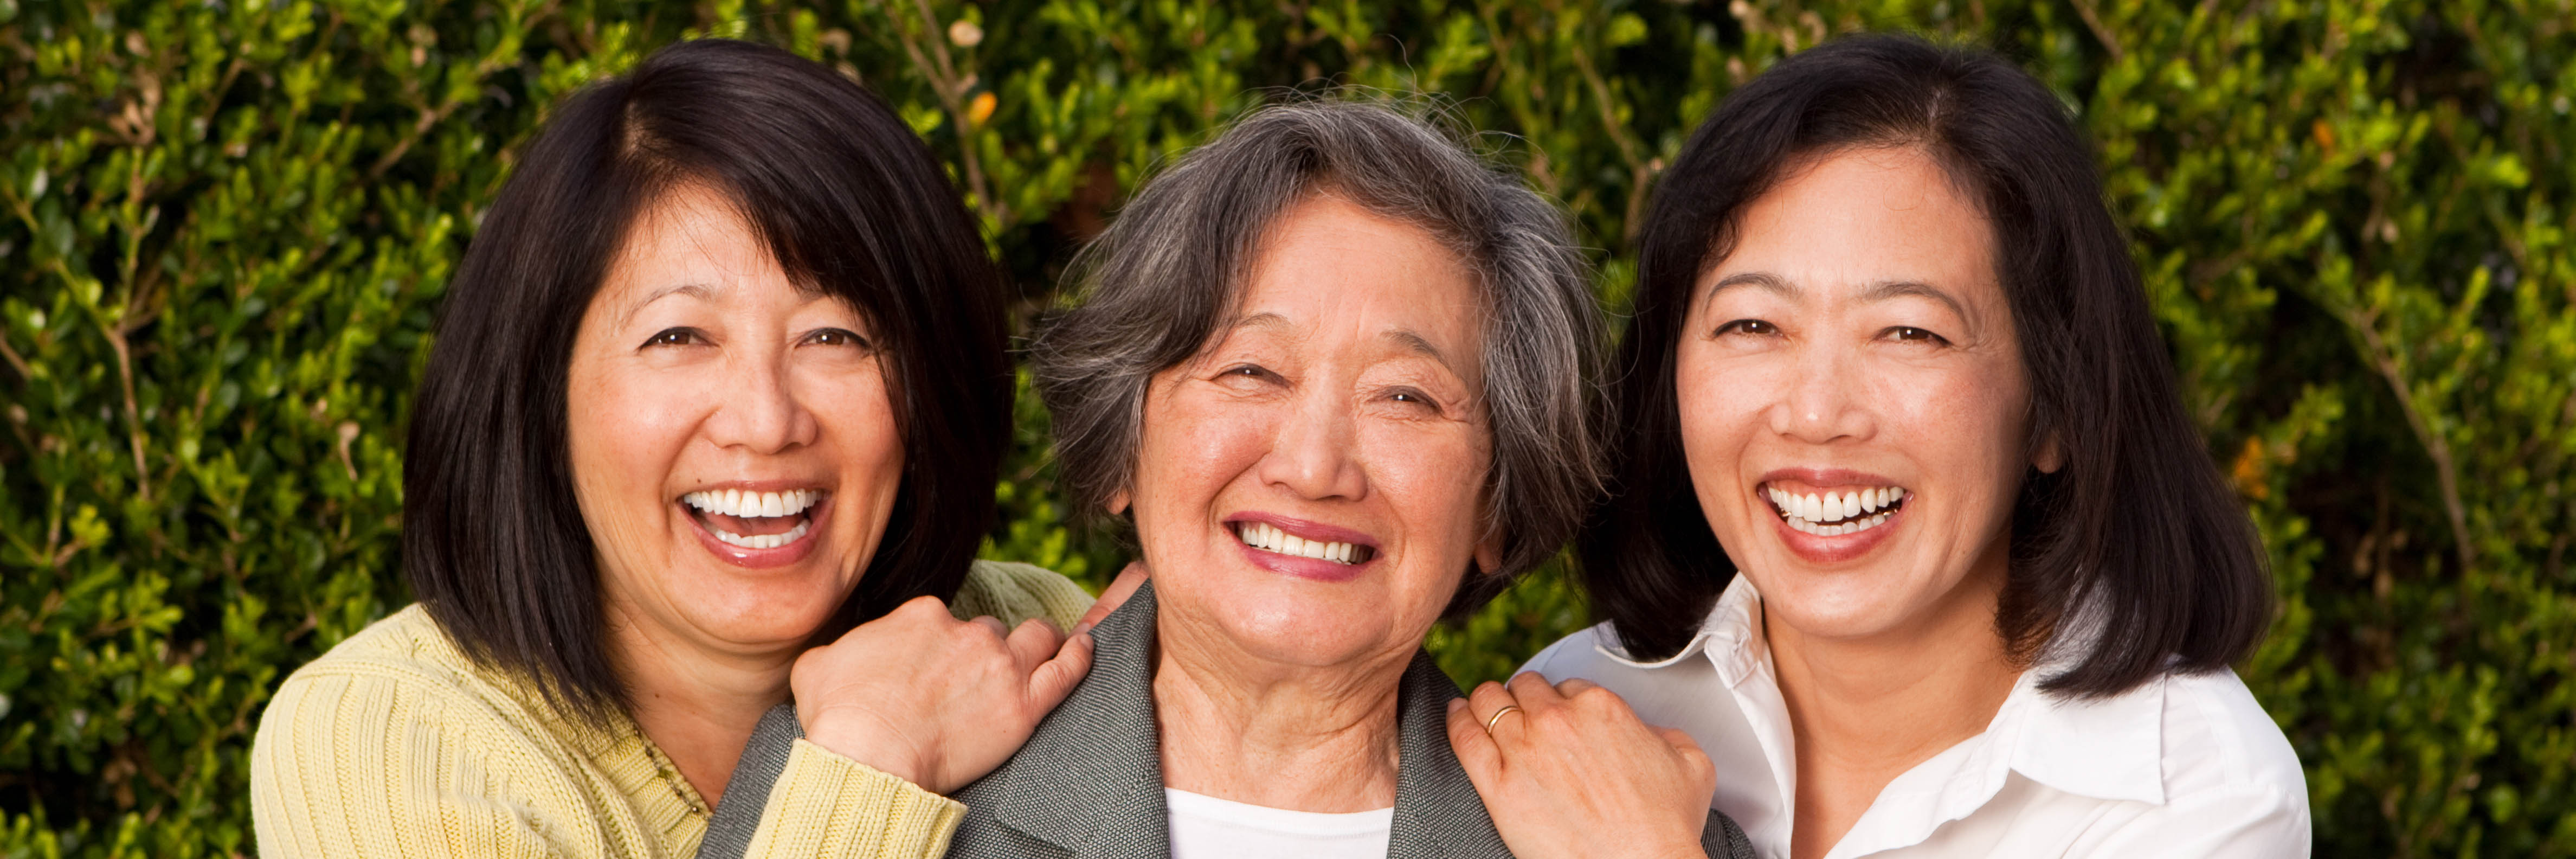 A mother and her two adult daughters, side-by-side, smiling outdoors.